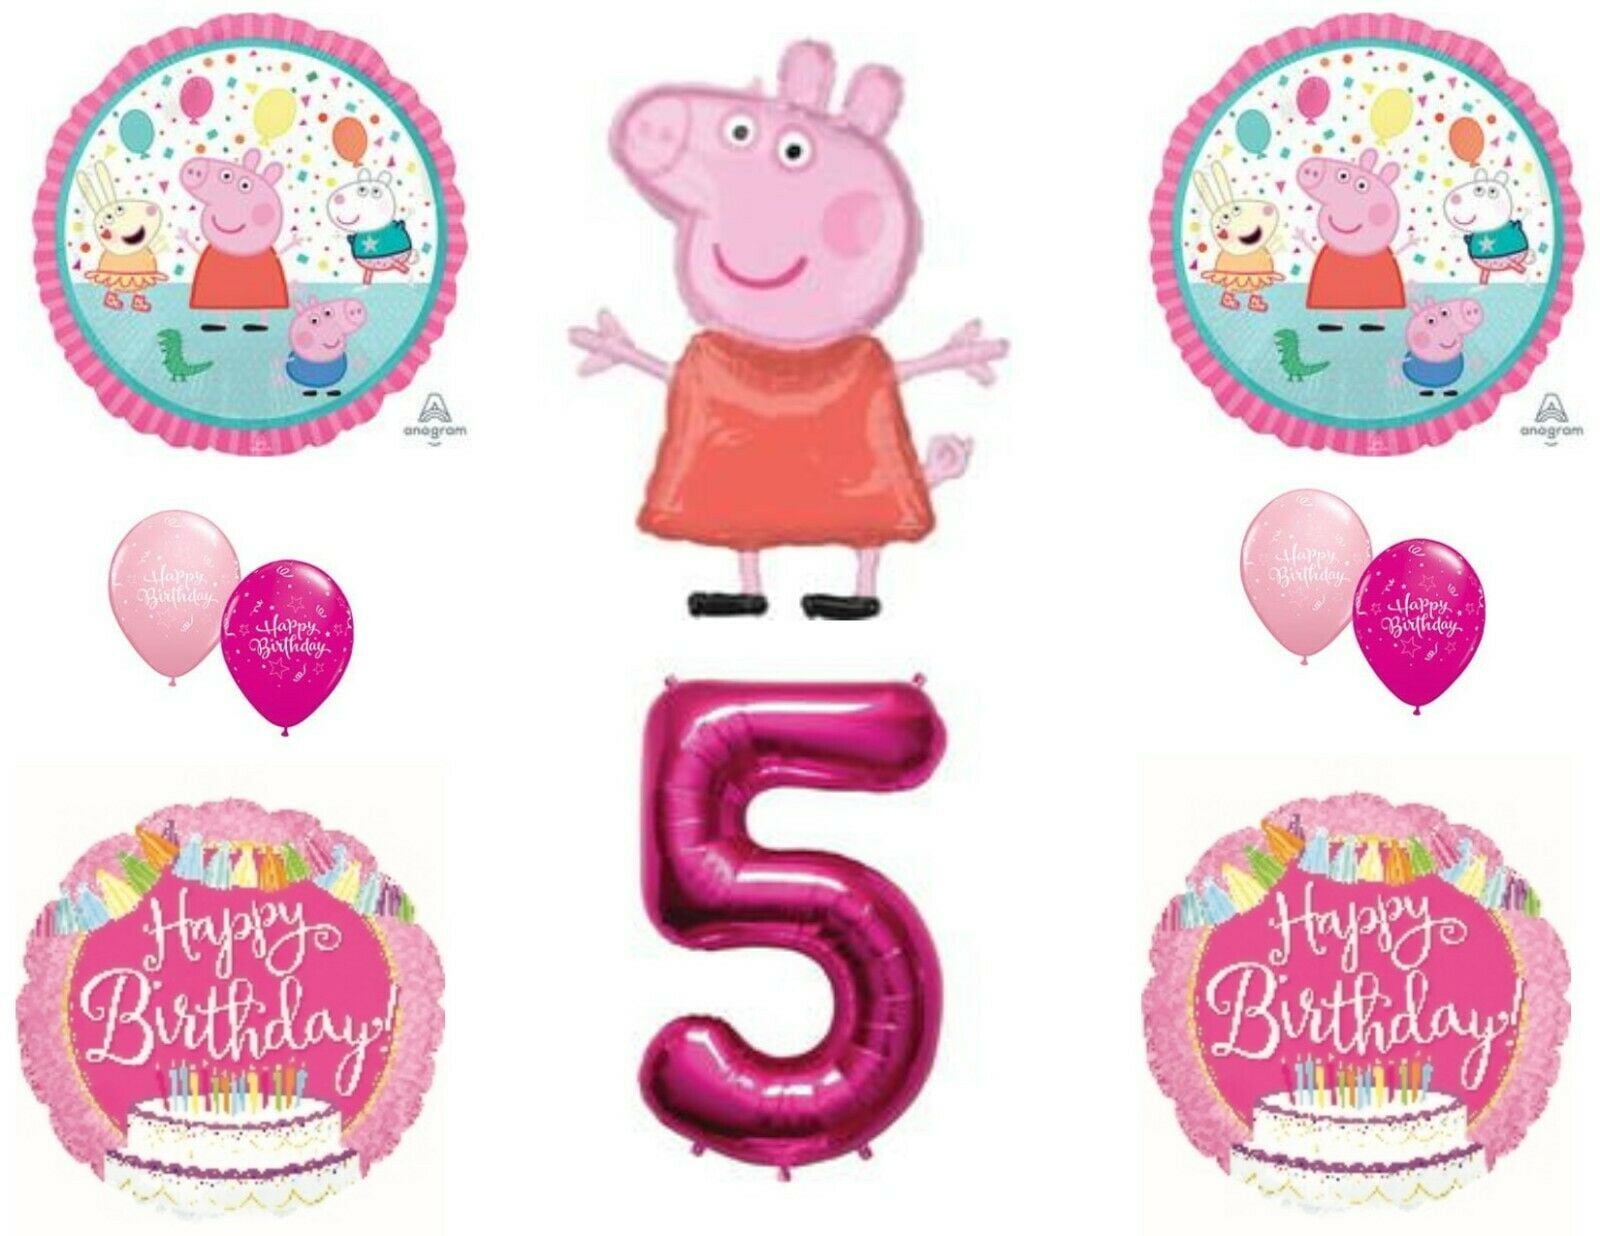 Cake Birthday Details about   7 pc Peppa Pig Party Hat Balloon Bouquet Party Decoration Nick Jr 